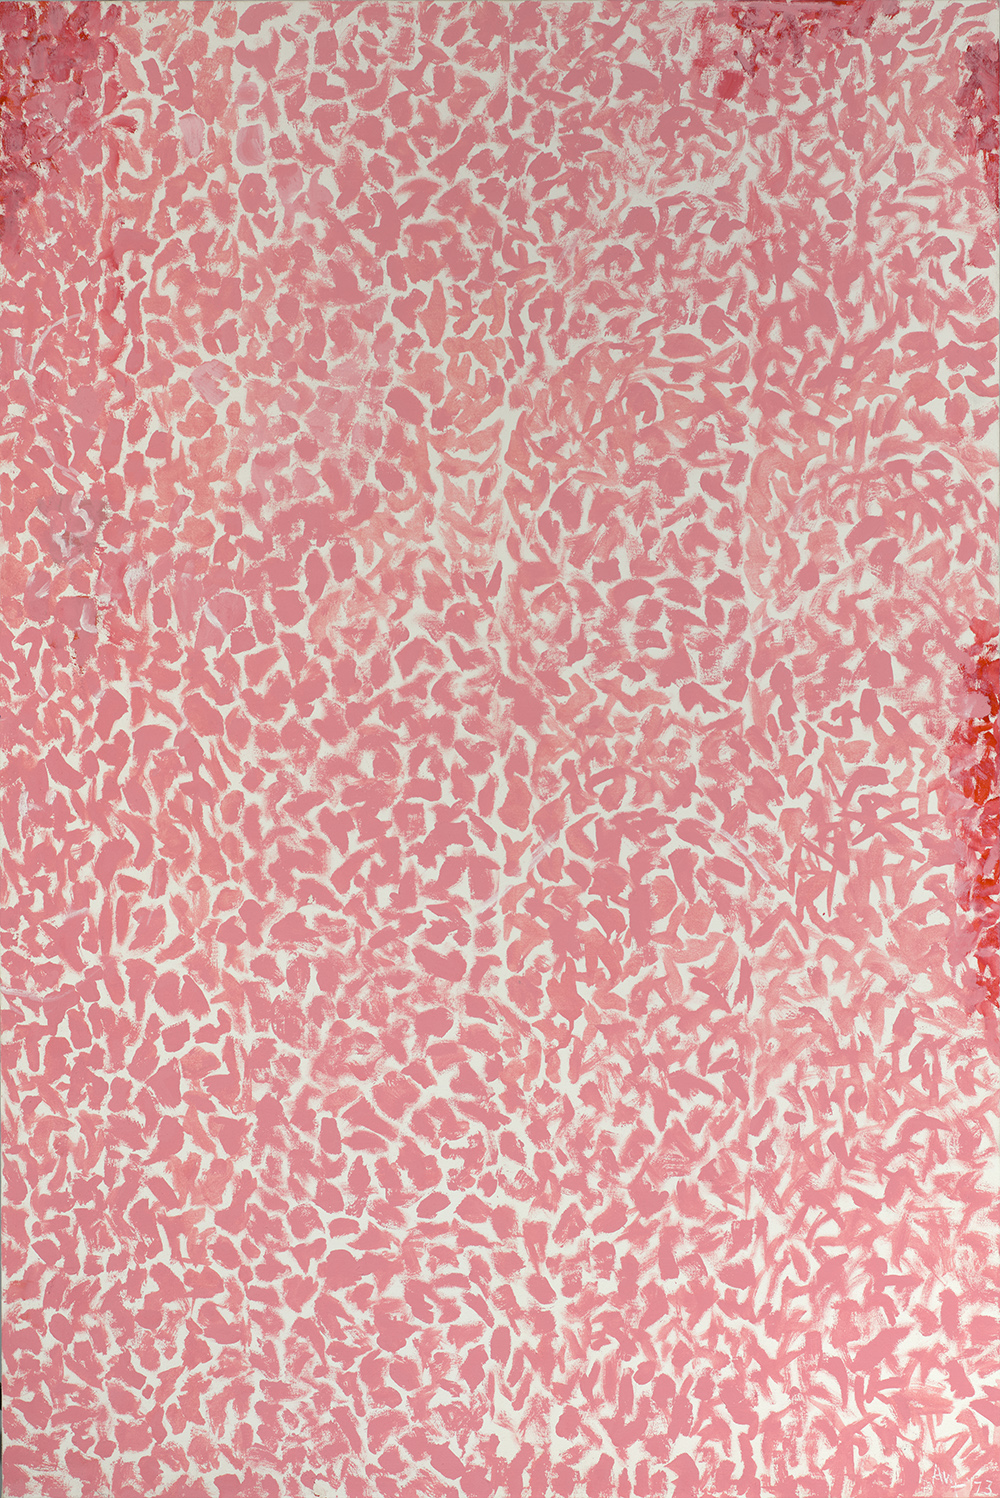 An abstract painting with pink and red splotches densely packed on a white background